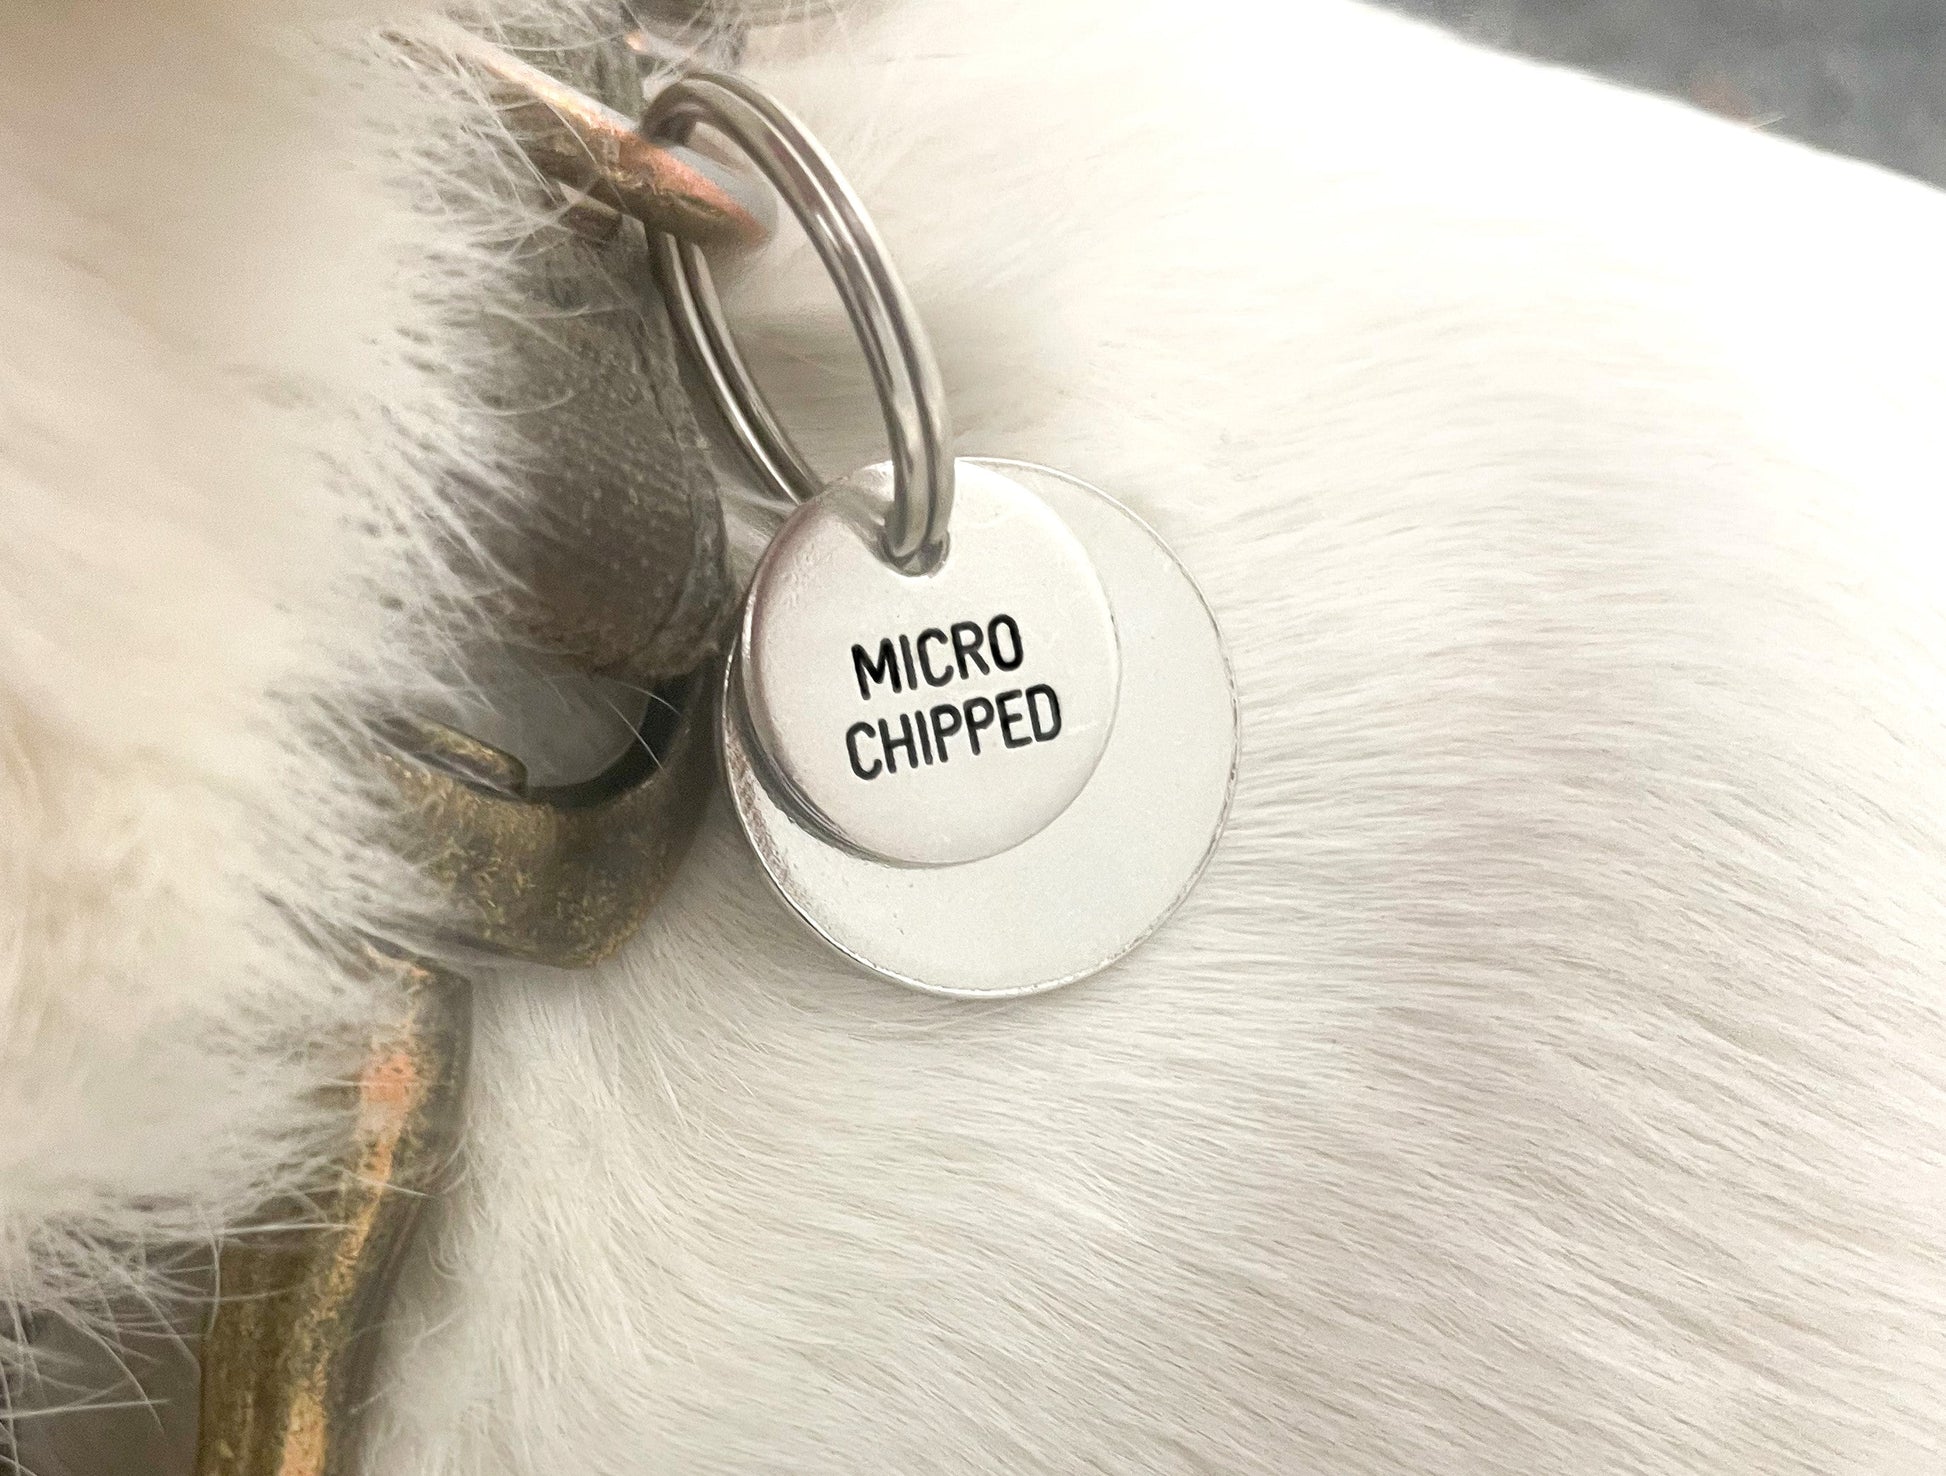 Microchipped Engraved Collar Charm - Microchipped Design Engraved Dog Tag - Cat ID Tag - Dog Collar Tag - Custom Dog Tag - Pet ID Tag - Pet Name Tag - Hand Made Dog Tag - Indoor Dog - Indoor Cat - Outdoor Dog - Outdoor Cat - Epileptic Cat - Epileptic Dog - Vaxxed Dog - Vaxxed Cat - Very Loved Dog 